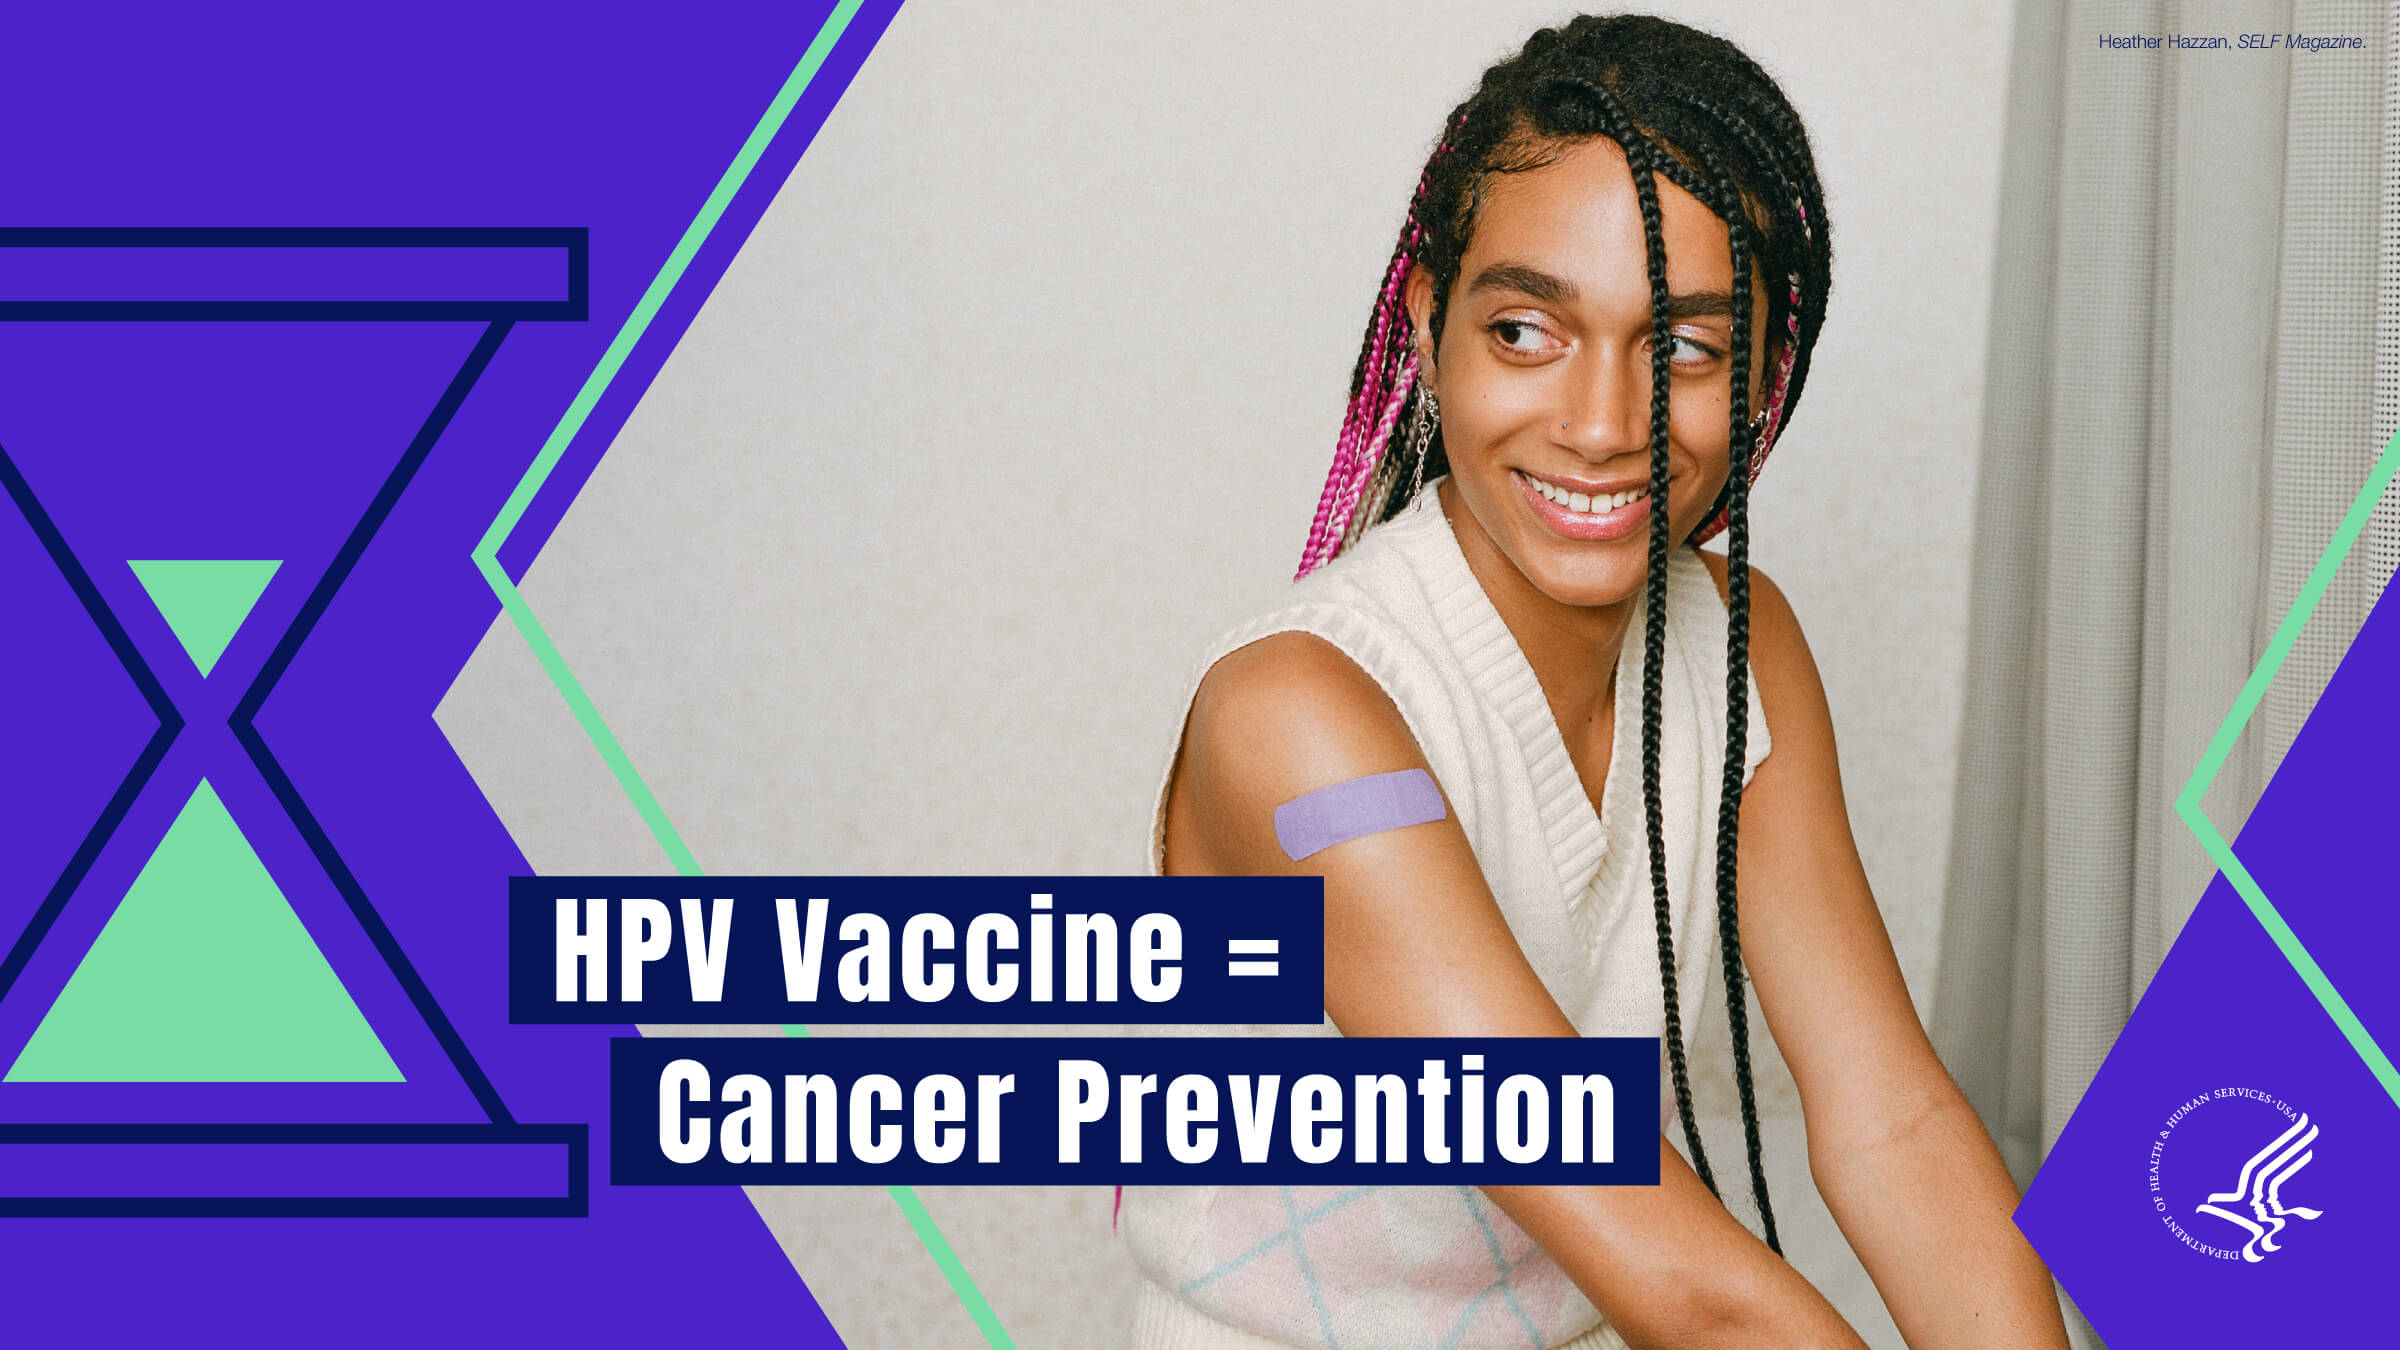 Image of a young Black woman smiling with an adhesive bandage on her arm. Text reads, "HPV Vaccine = Cancer Prevention"